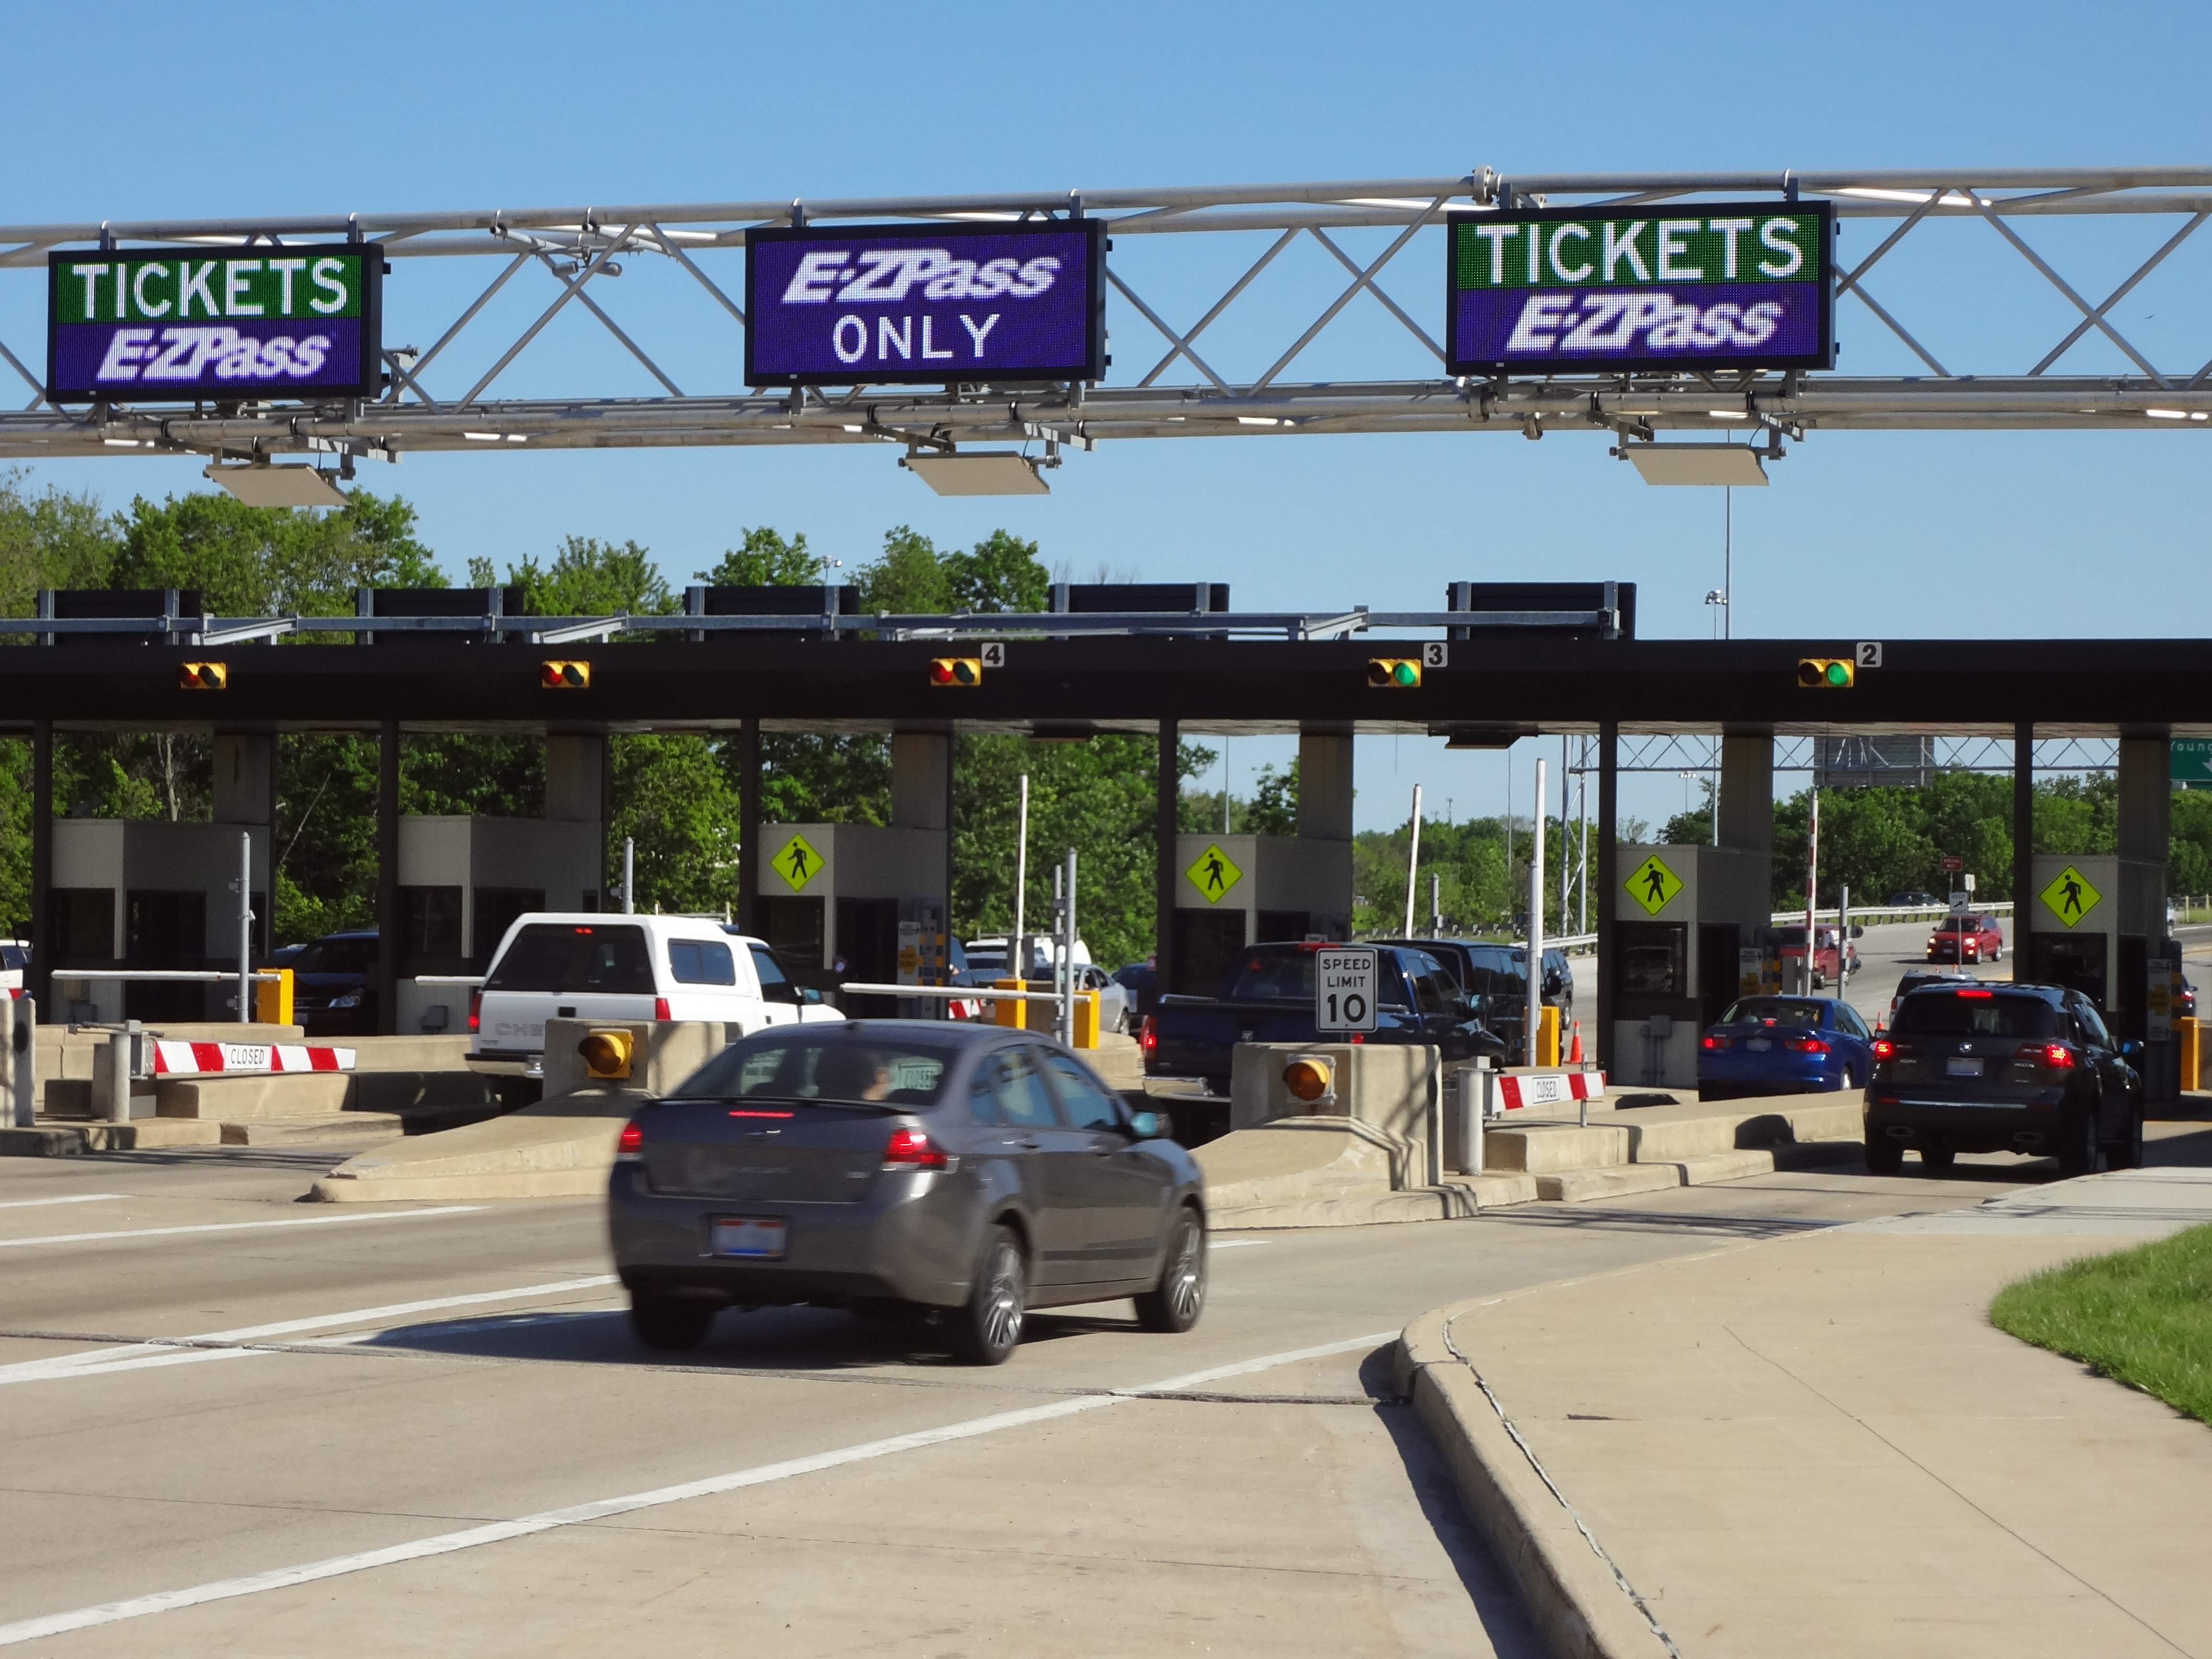 Ohio Turnpike and Infrastructure Commission